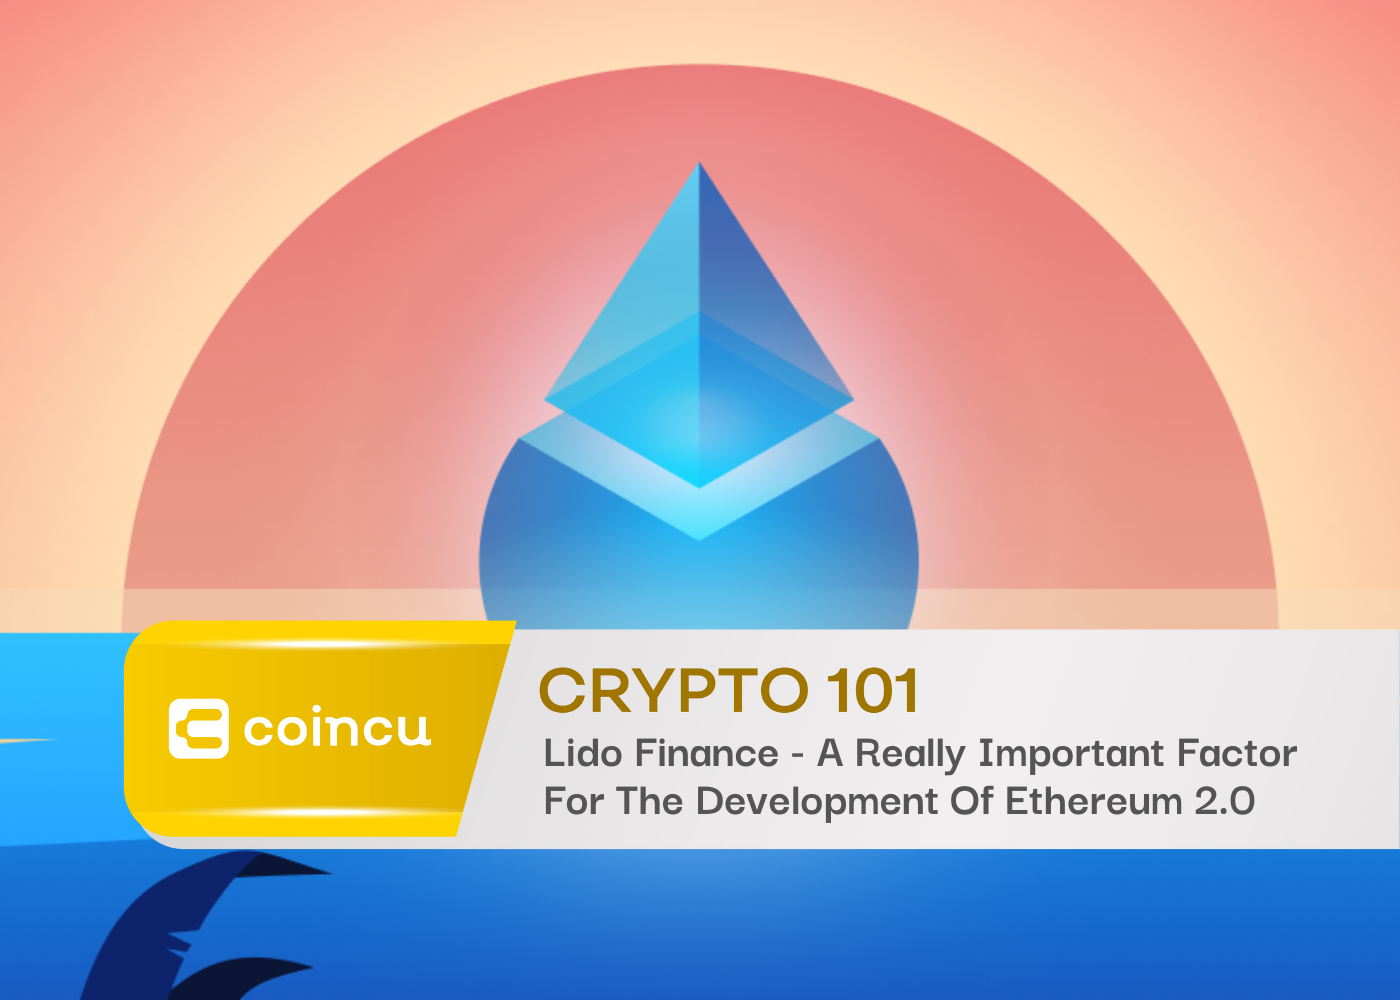 Lido Finance - A Really Important Factor For The Development Of Ethereum 2.0